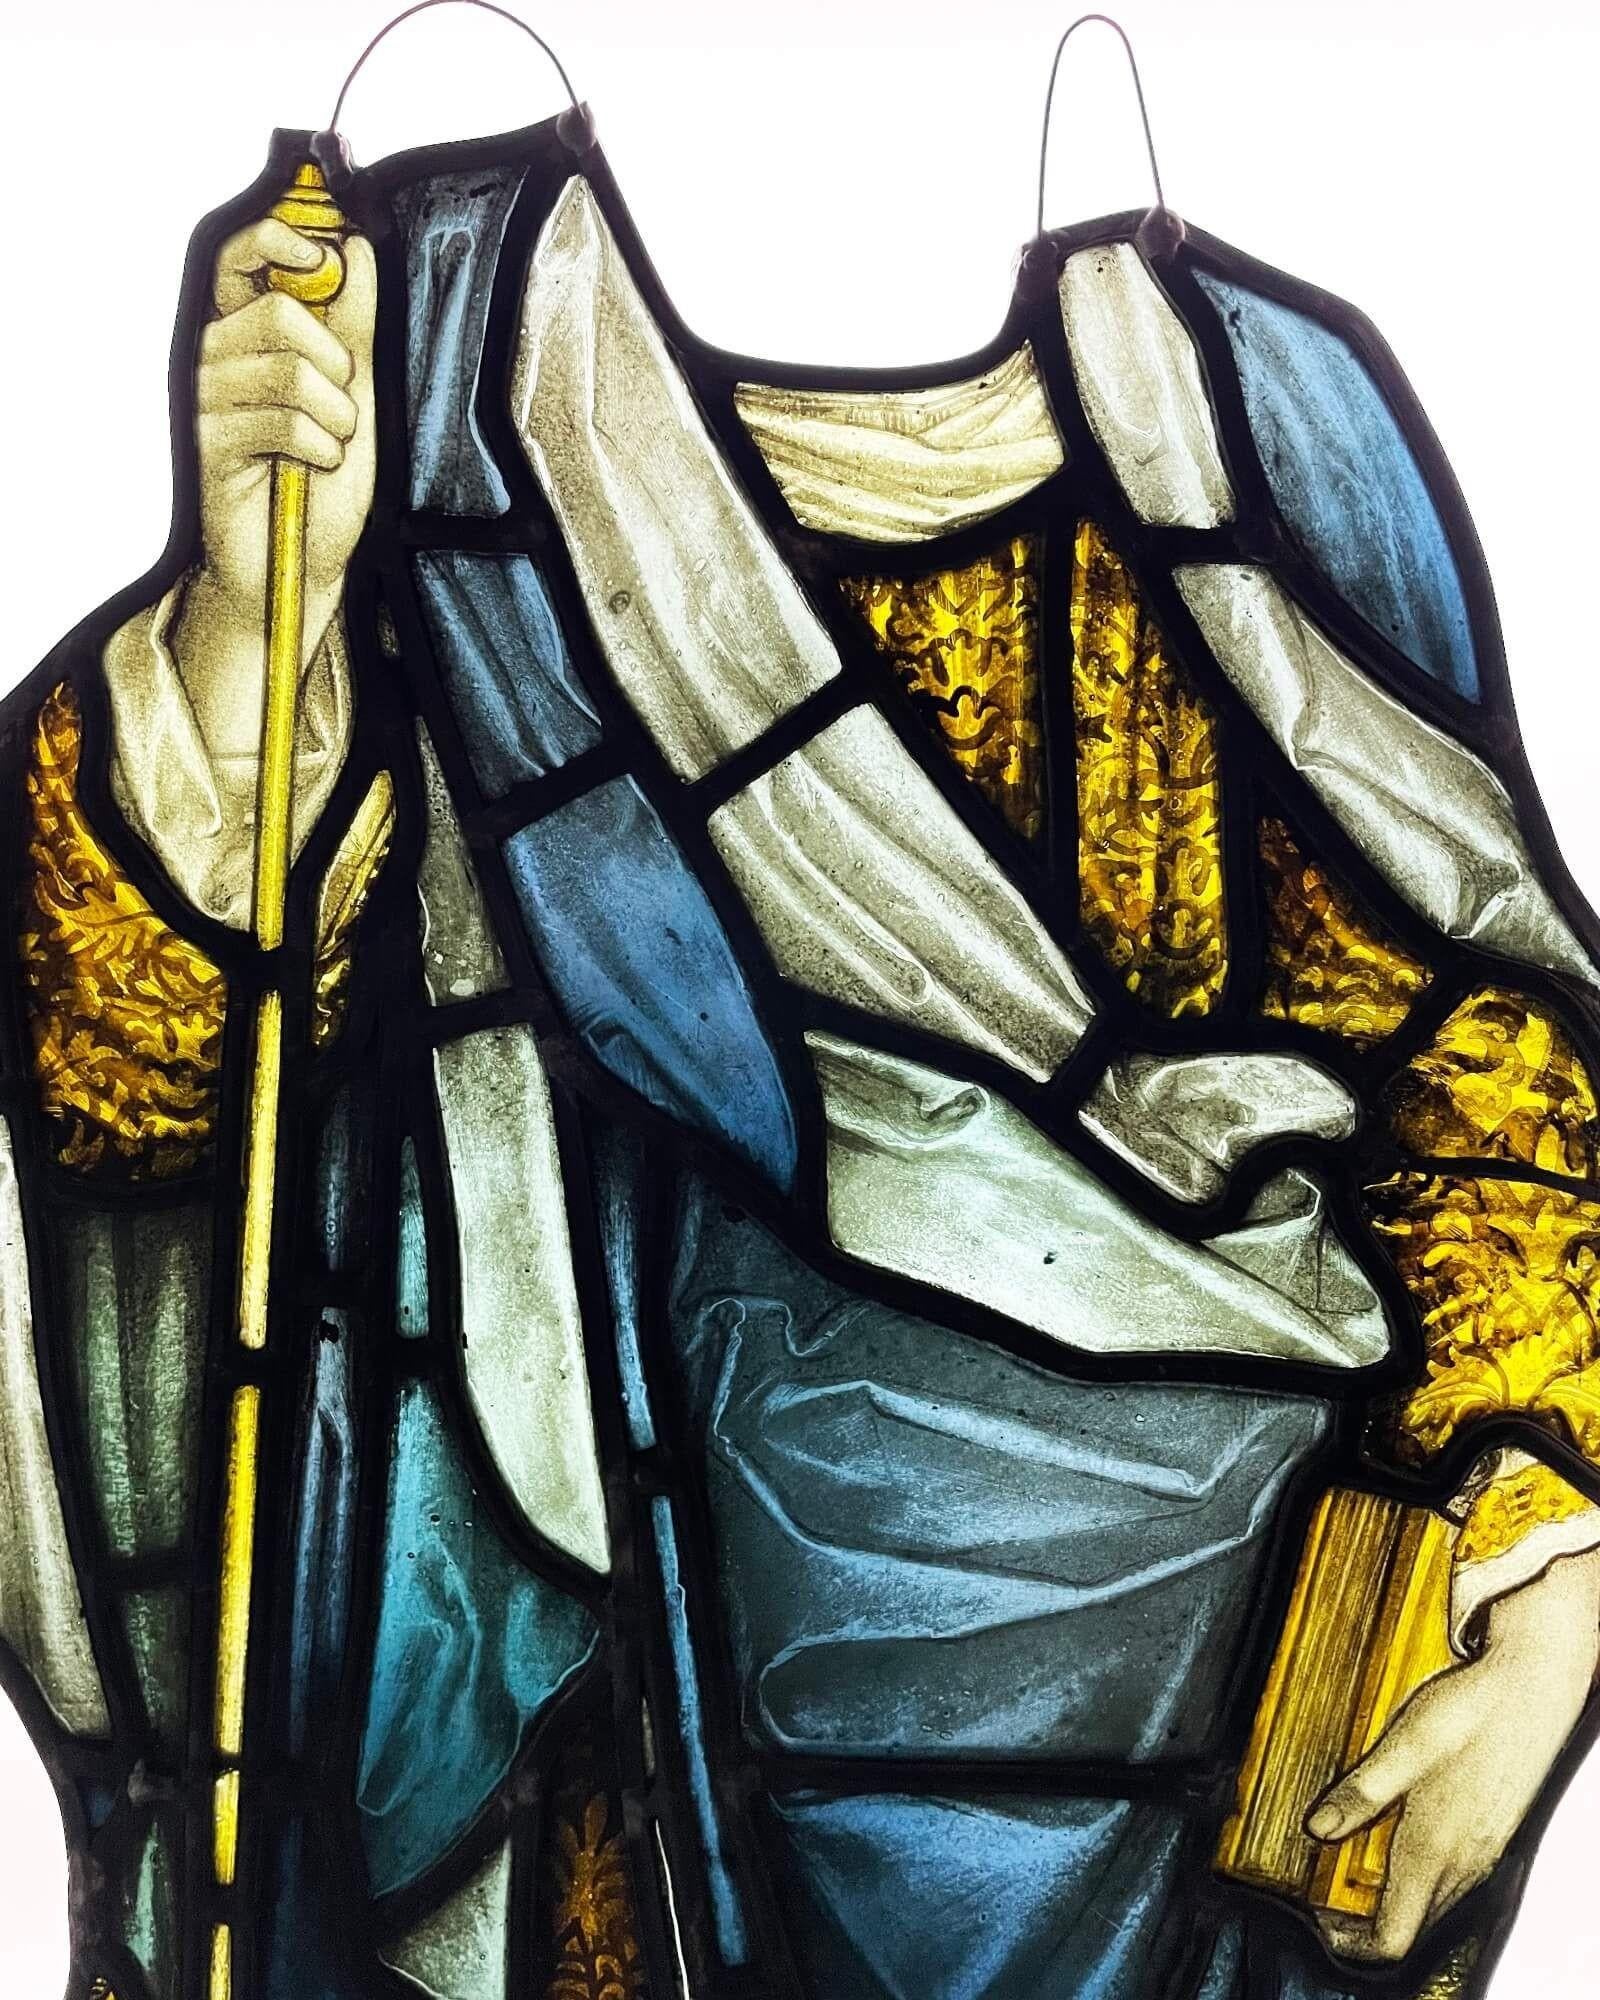 A large antique stained glass hanging panel of a nobleman’s torso dating to circa 1850. The vivid colour of this well-painted stained glass window has stood the test of time. At over 150 years old, the panel shows a nobleman carrying a book, robe,